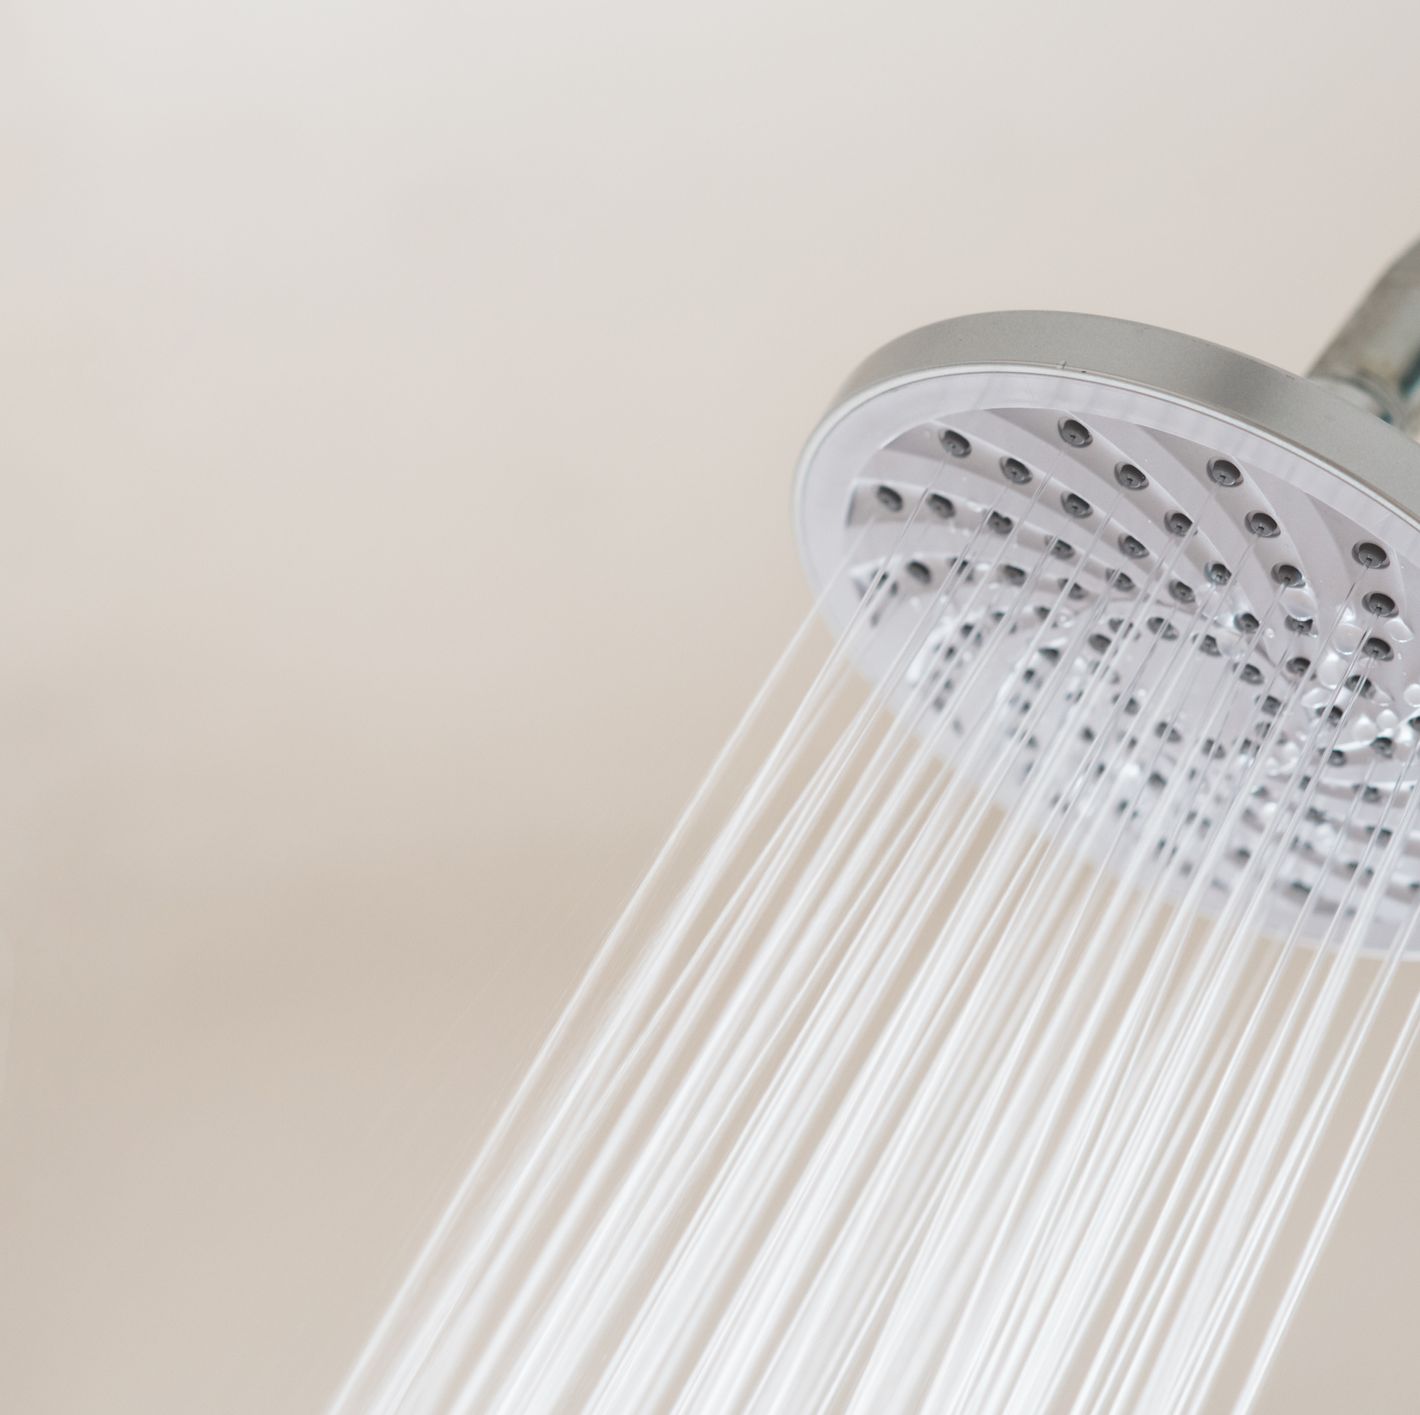 People Who Take Cold Showers Take Fewer Sick Days, Study Finds